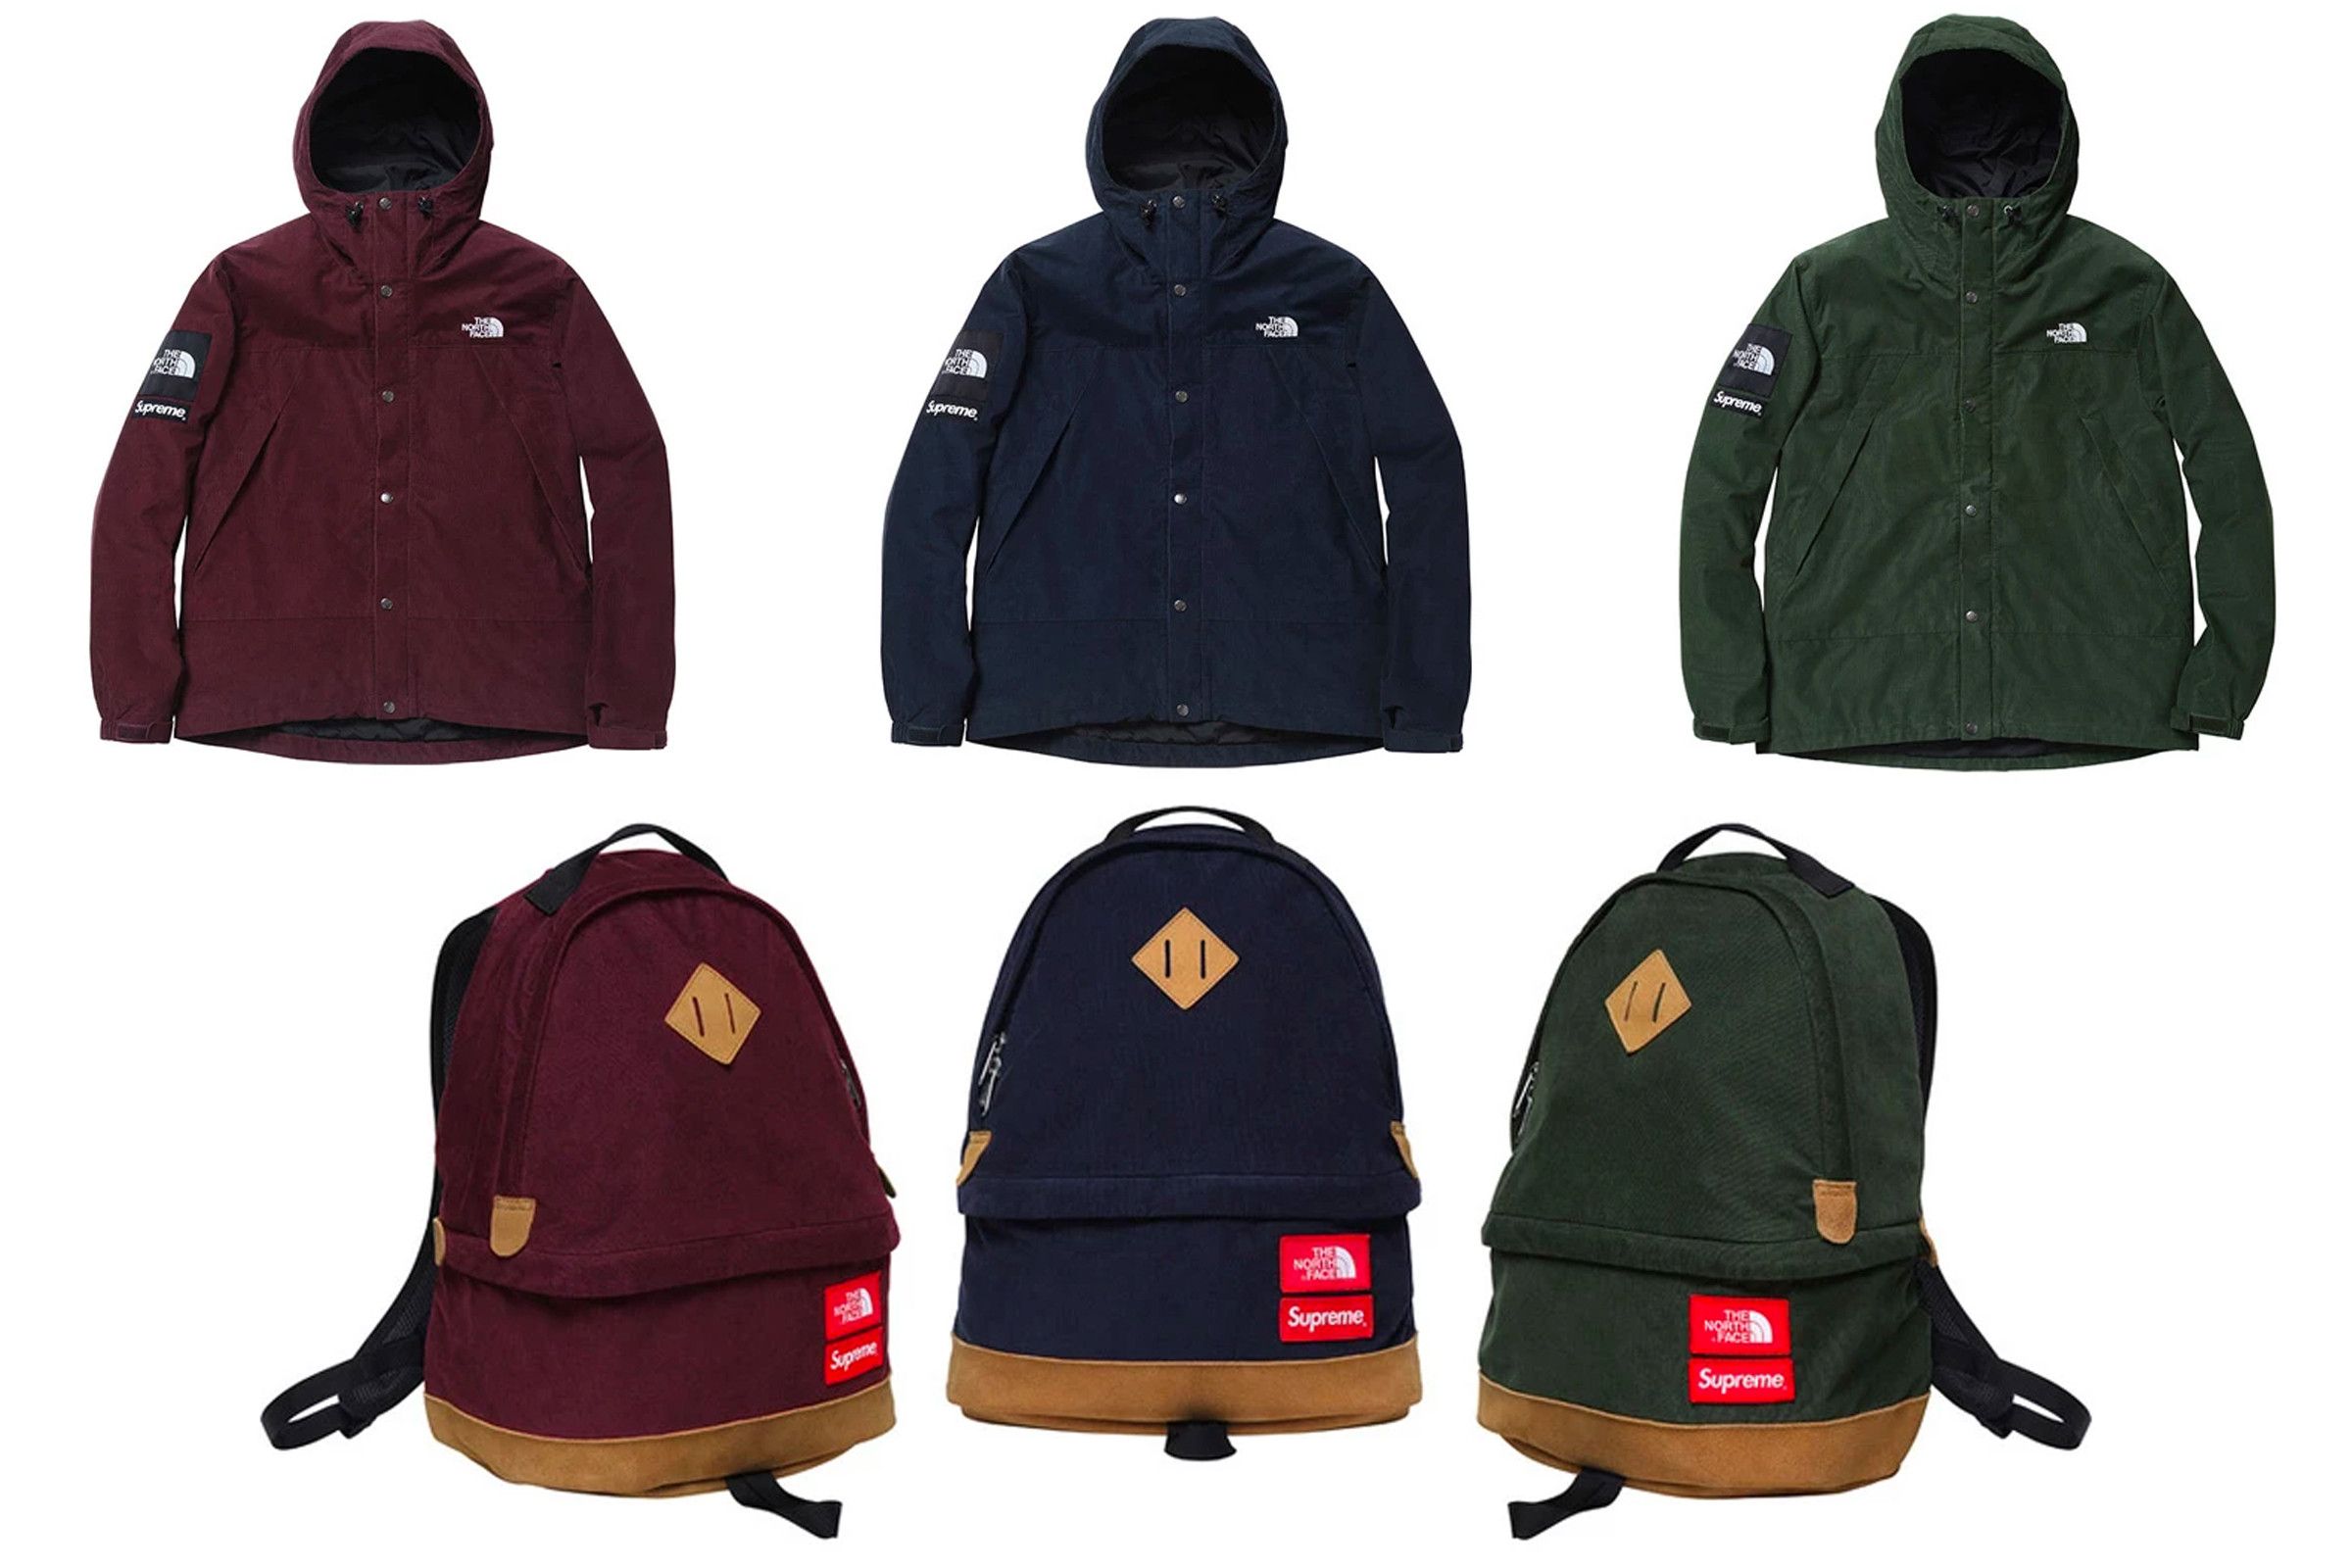 Supreme x The North Face continue to expand their universe for